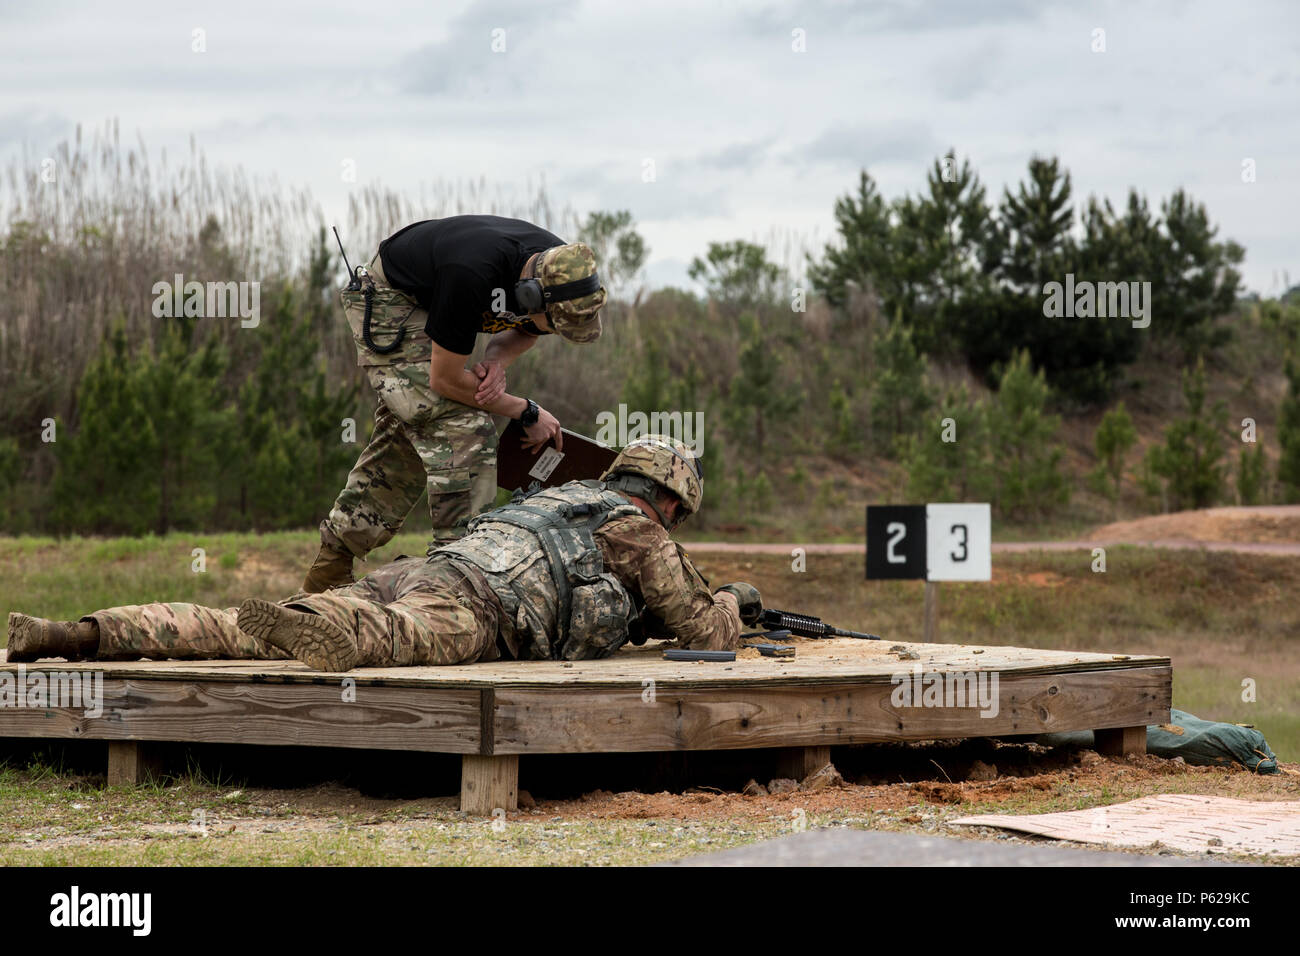 U S Army 1st Lt Matthew High Resolution Stock Photography and Images - Alamy